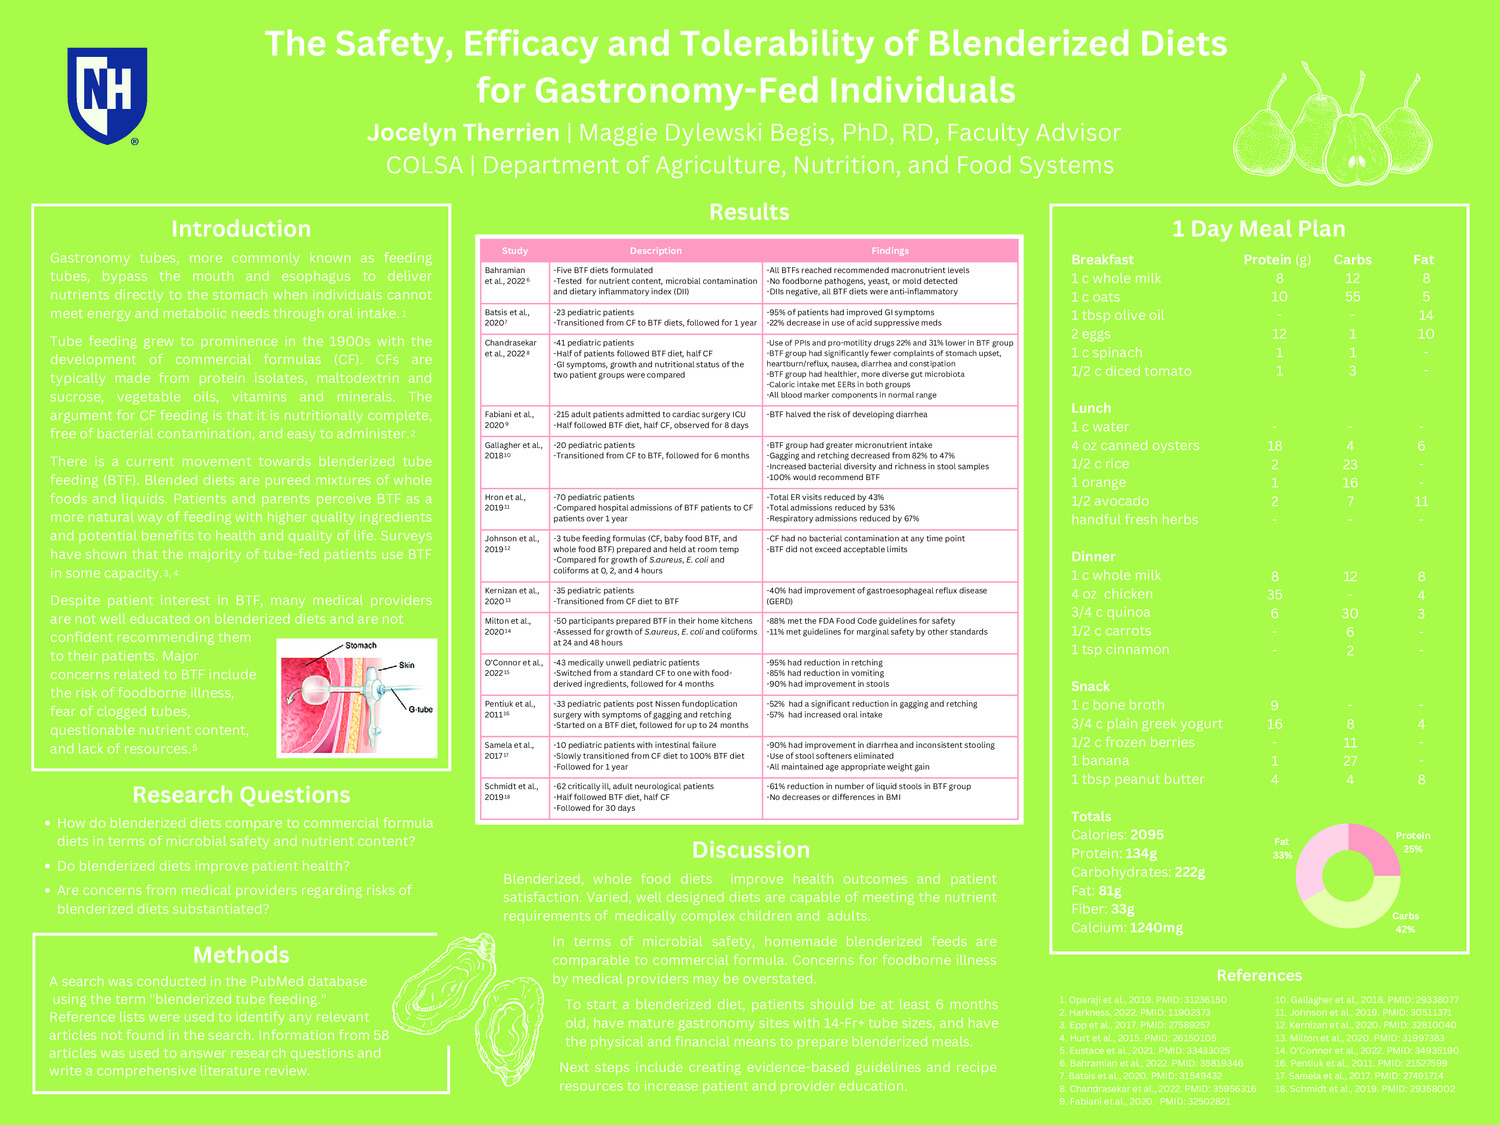 The Safety, Efficacy And Tolerability Of Blenderized Diets For Gastronomy-Fed Individuals by jt1018